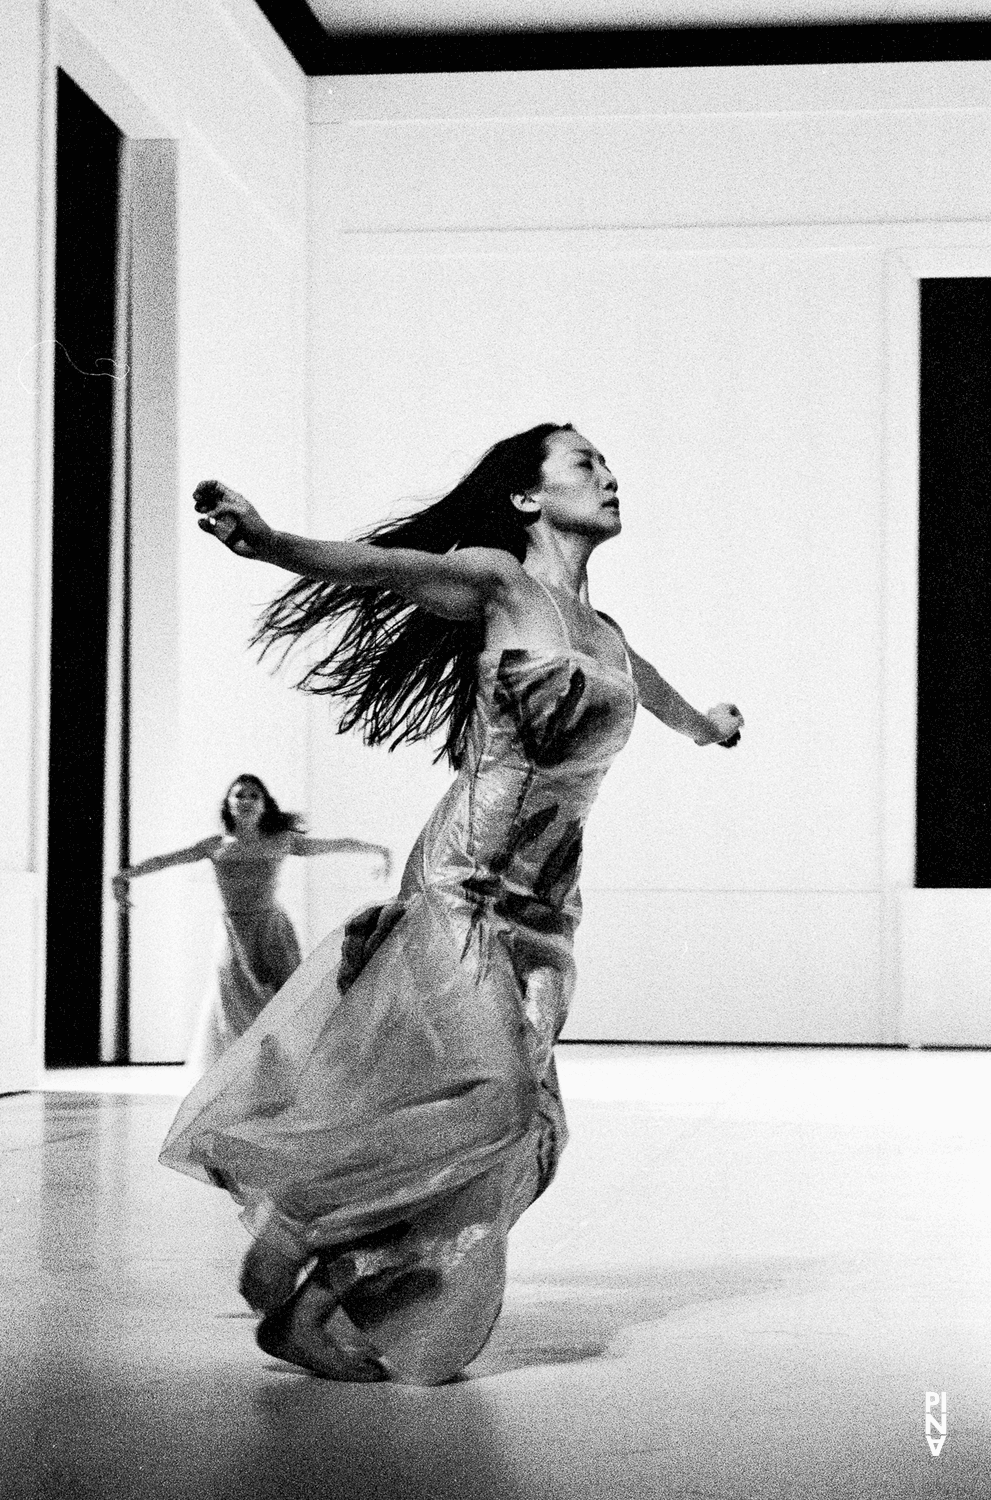 Azusa Seyama and Ditta Miranda Jasjfi in “For the Children of Yesterday, Today and Tomorrow” by Pina Bausch